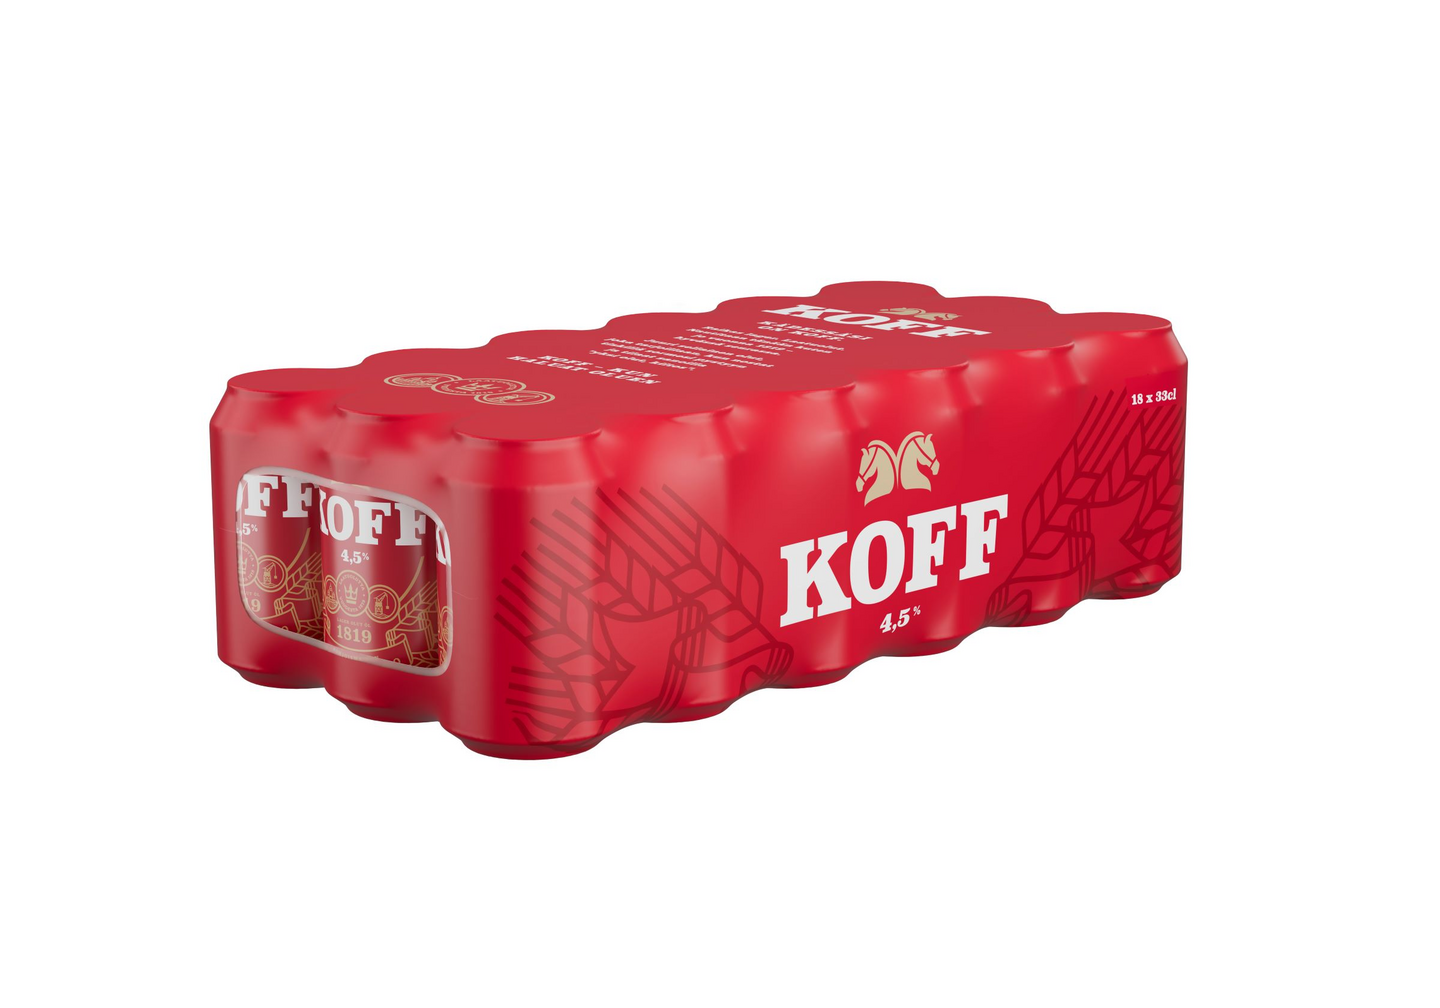 Koff lager olut 4,5% 0,33l 18-pack DOLLY